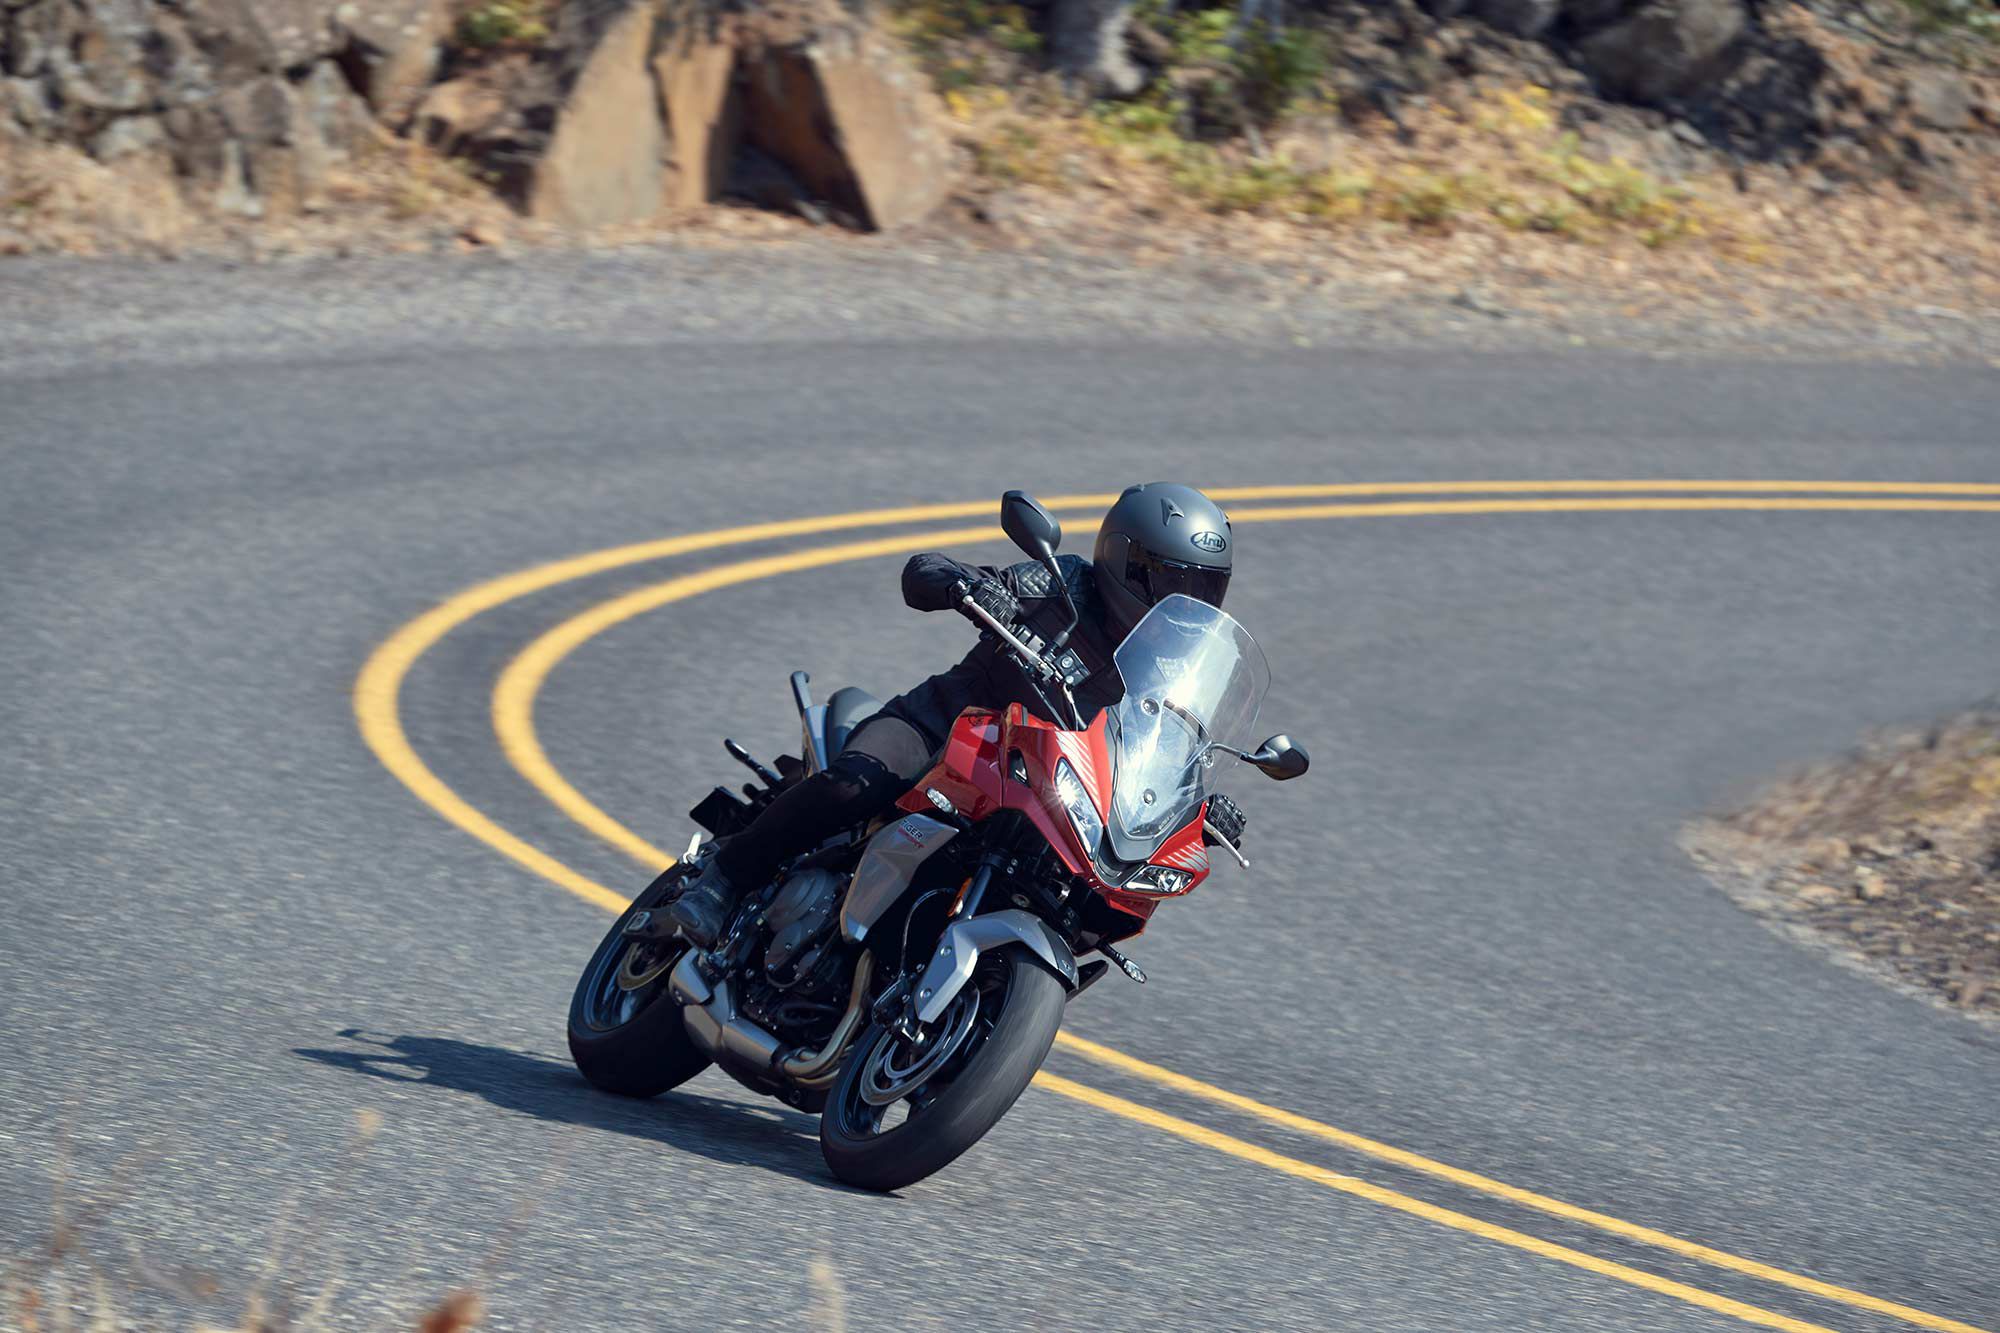 The new Tiger Sport 660 hedges its bet that Triumph’s triple engine performance will give it an edge on the competition with its combination of torque, midrange performance, and peppy top-end power.